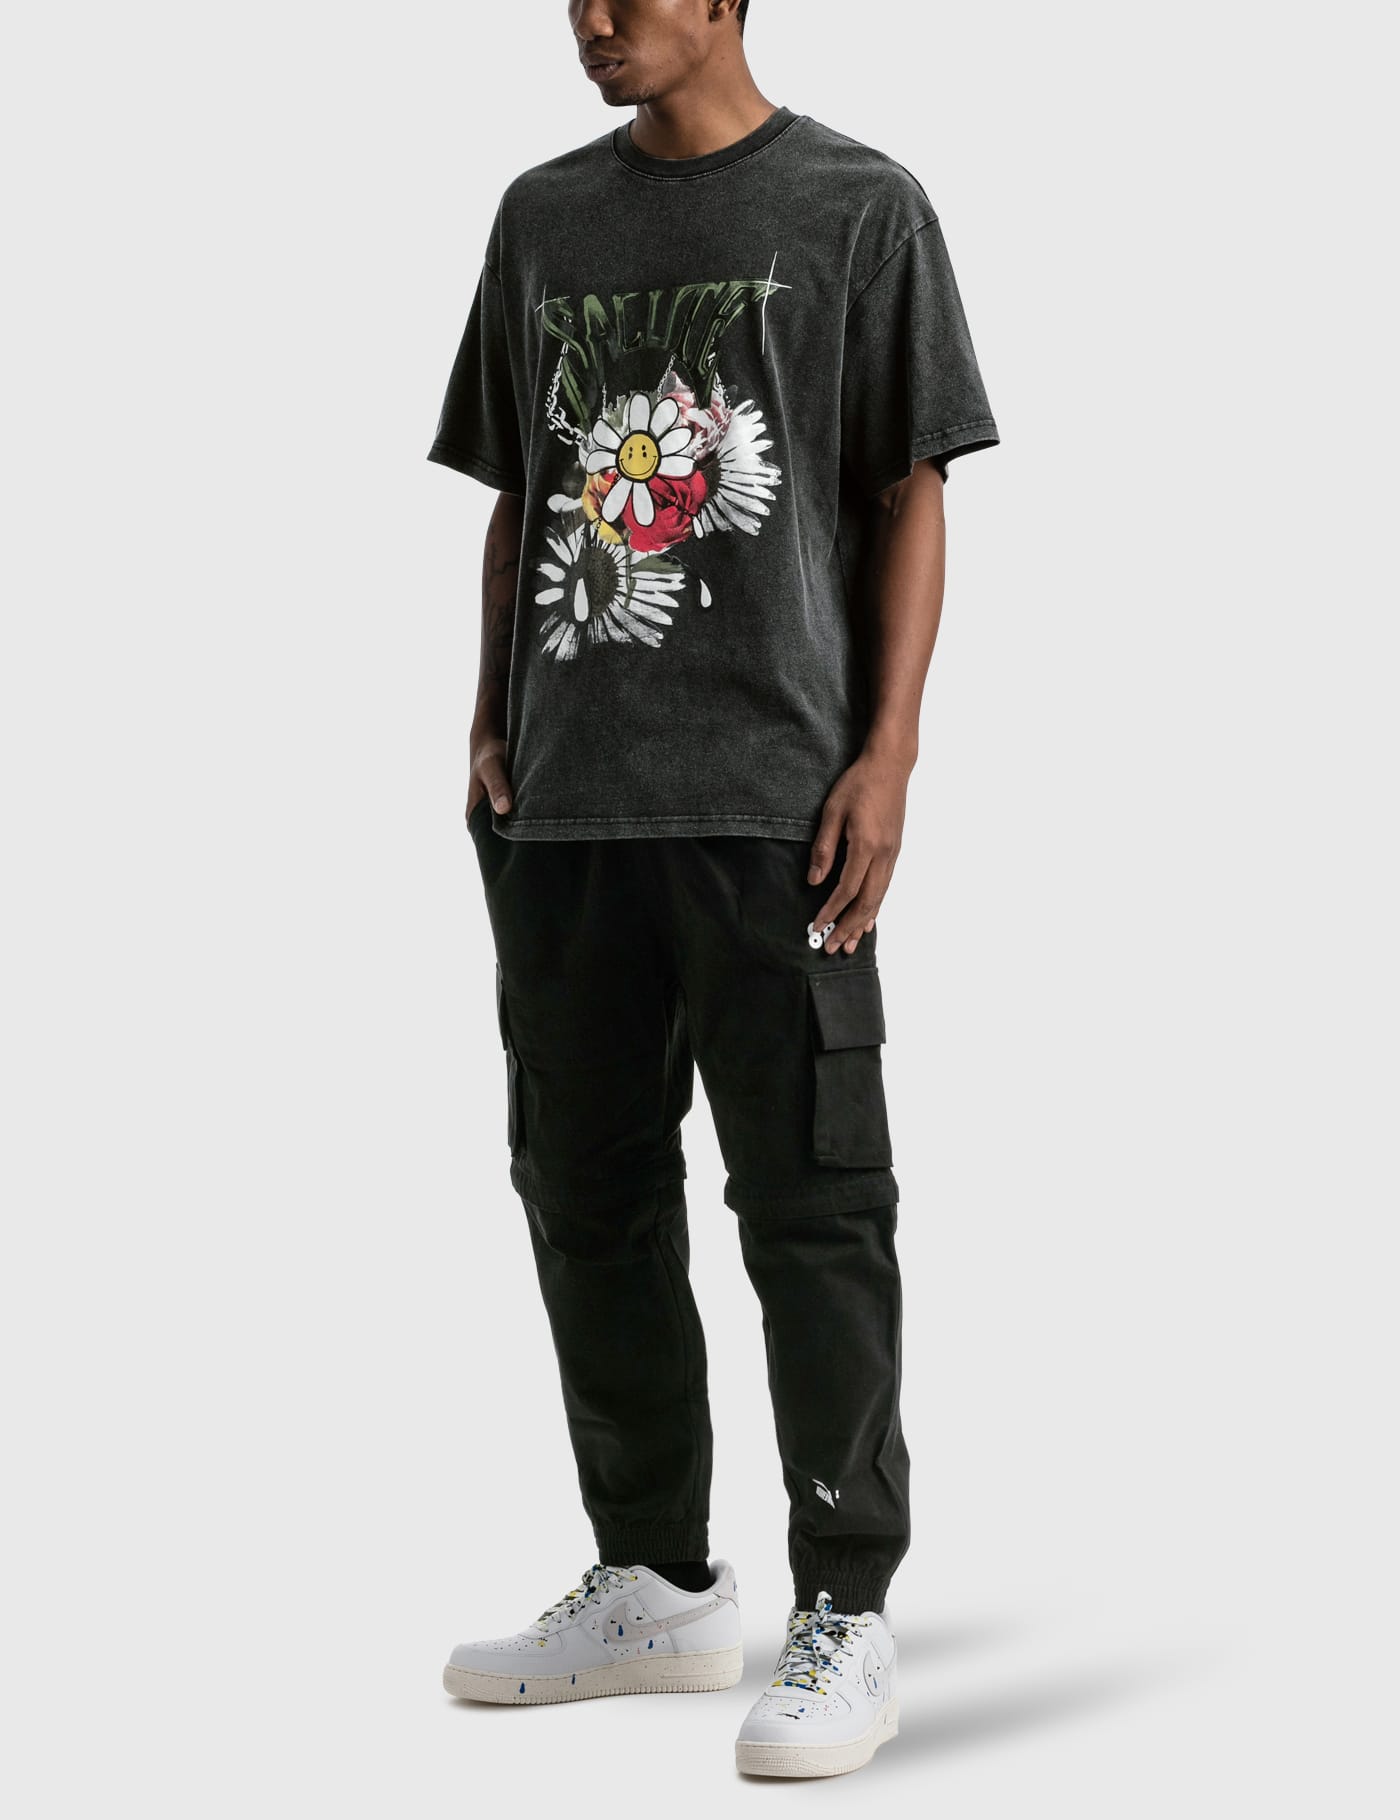 Salute Academy - Flower Anarchy T-Shirt | HBX - Globally Curated 